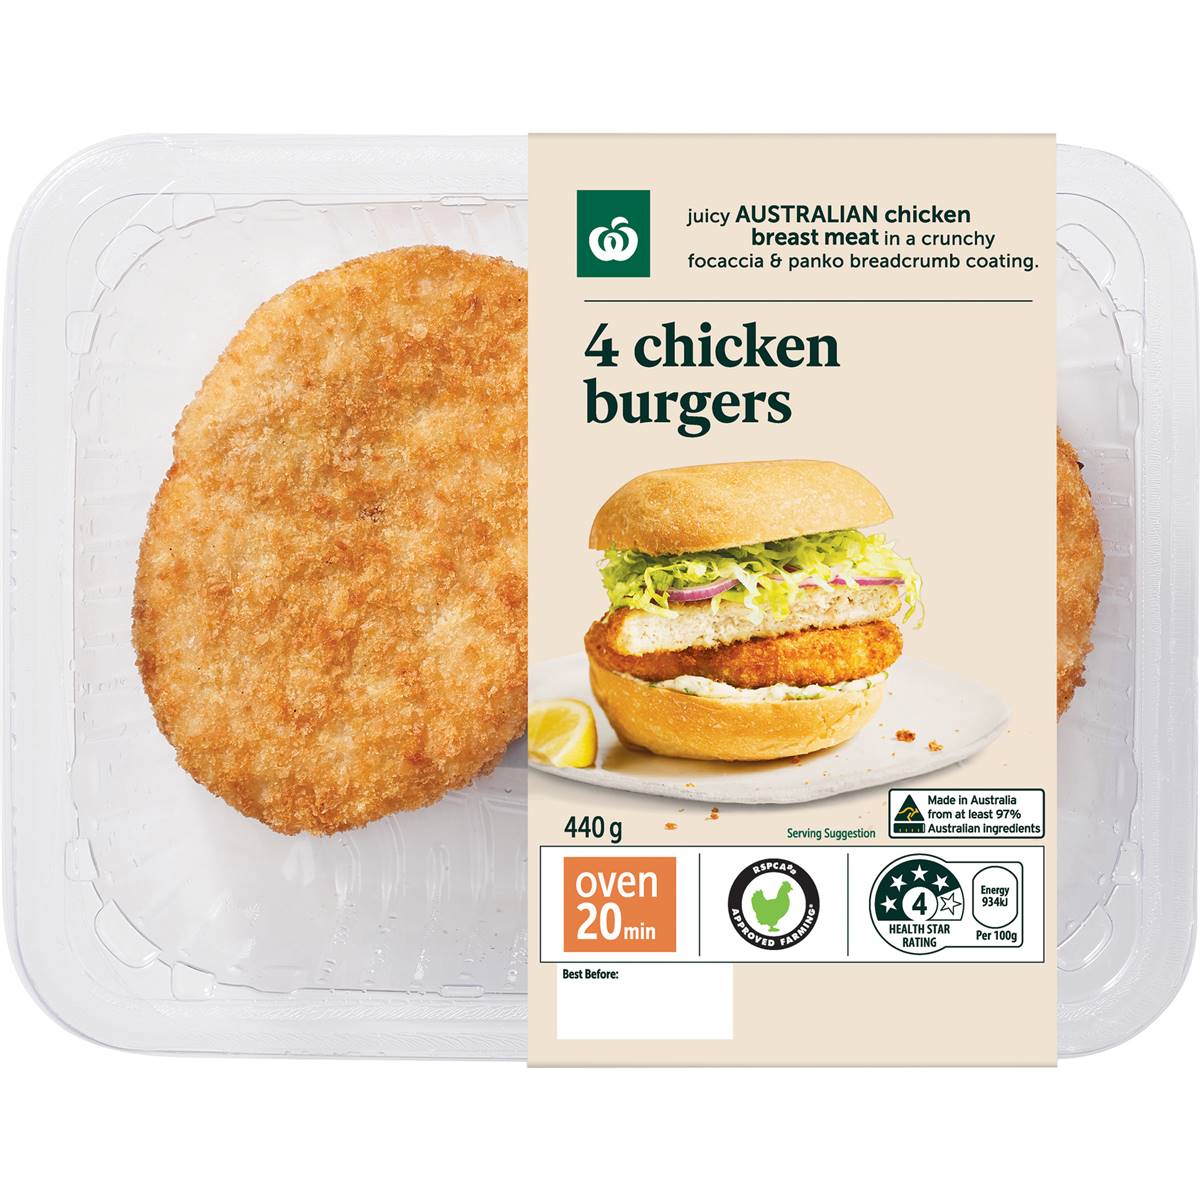 Calories in Woolworths Crumbed Chicken Burgers